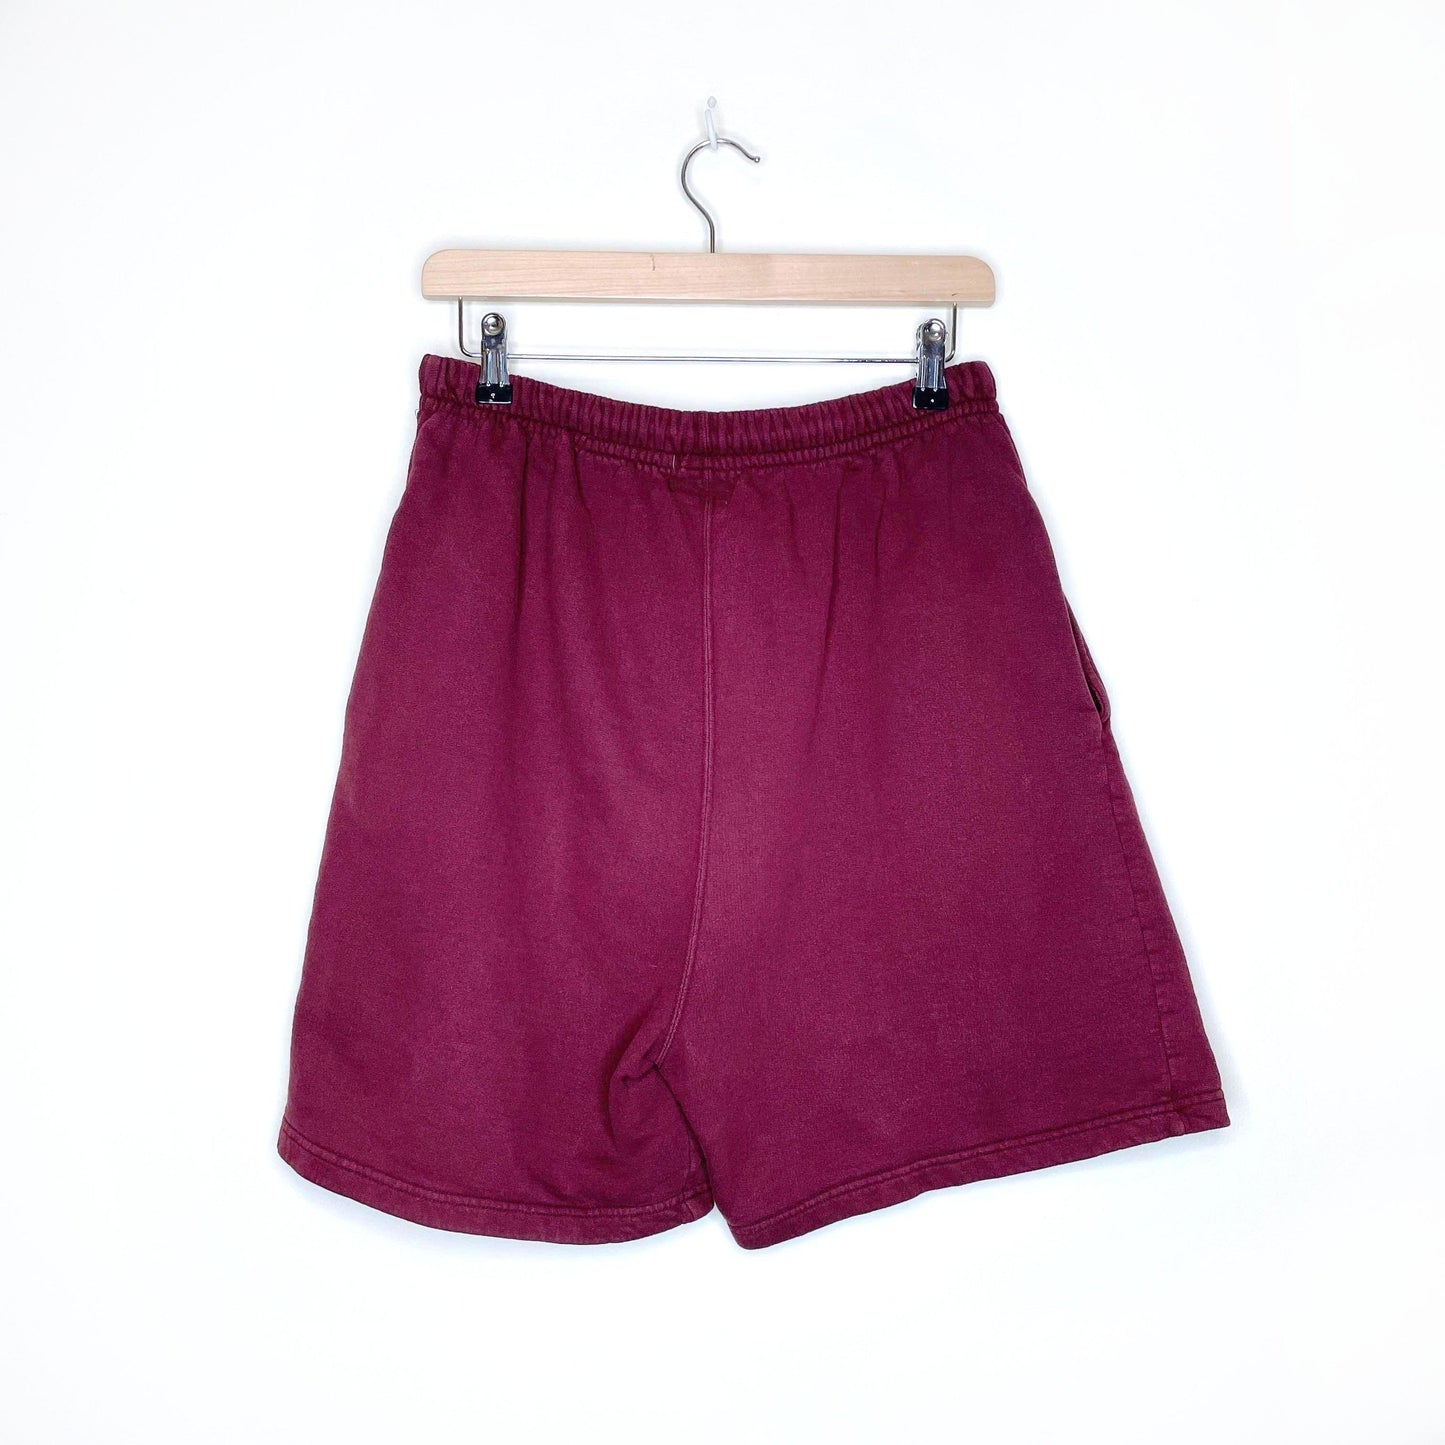 vintage 90's roots sweat shorts - size small